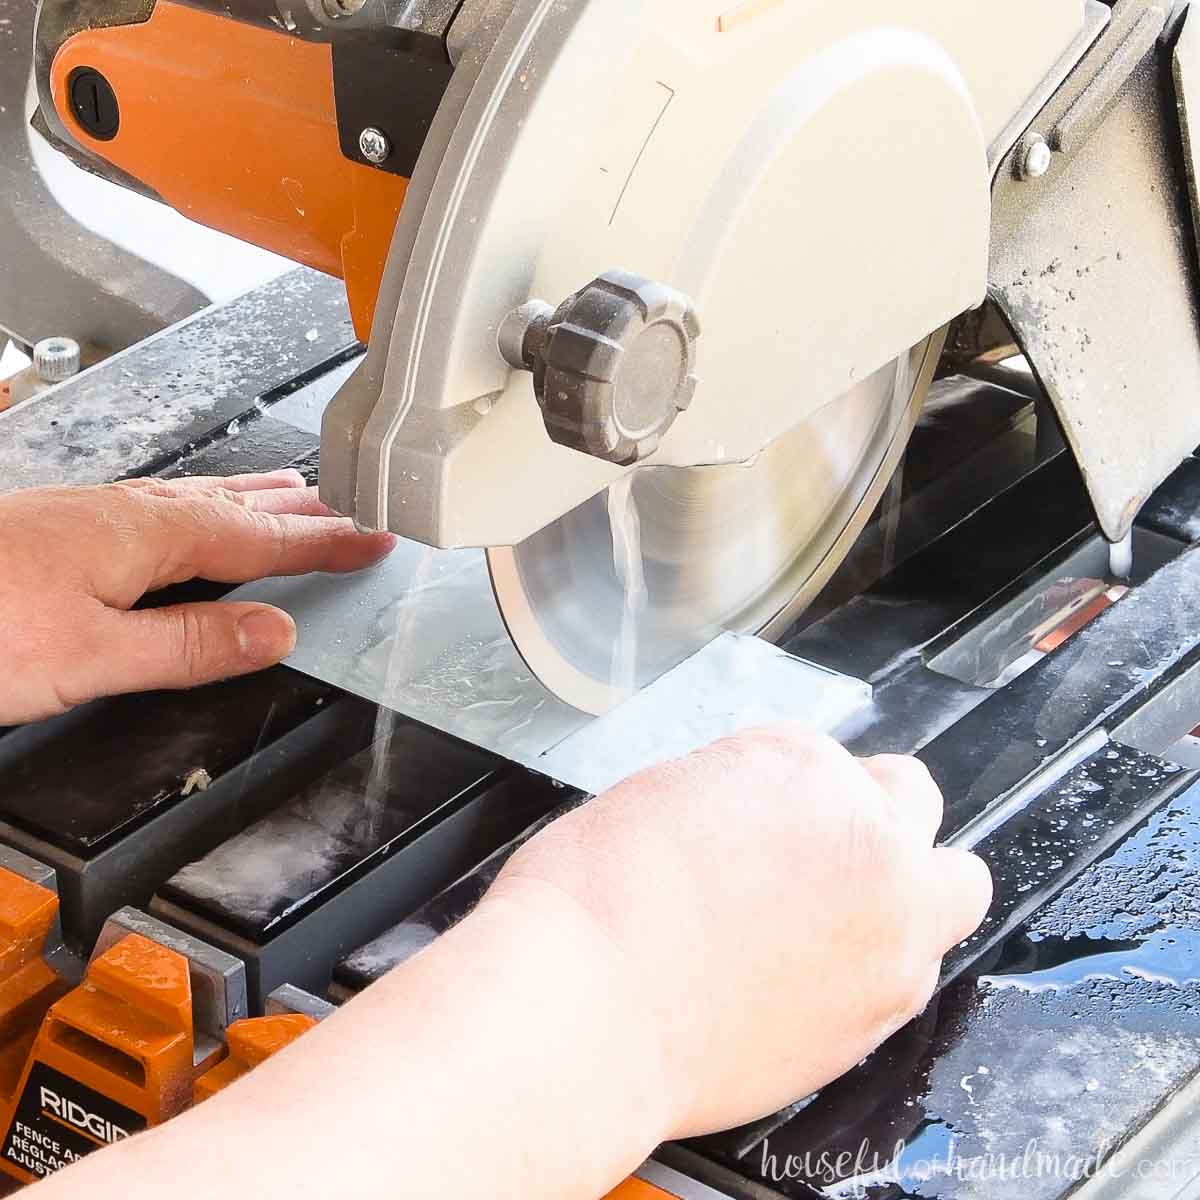 Cutting a glass tile on a tile saw. 